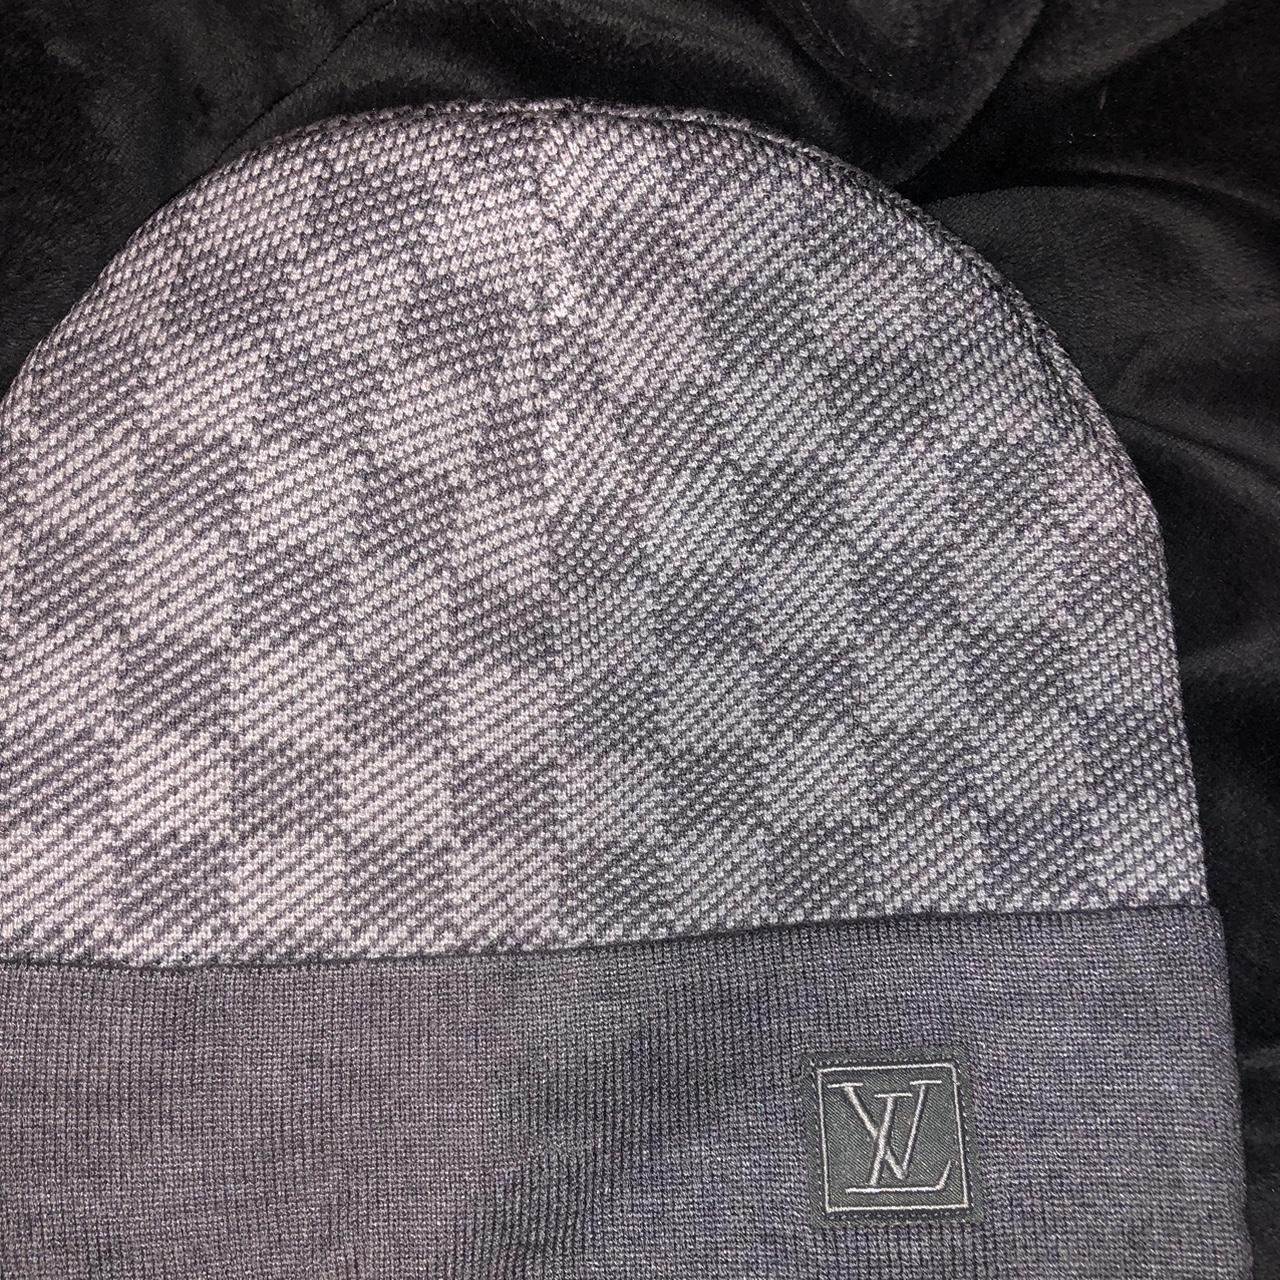 Upcycled Louis Vuitton trucker hat. Has the ponytail - Depop